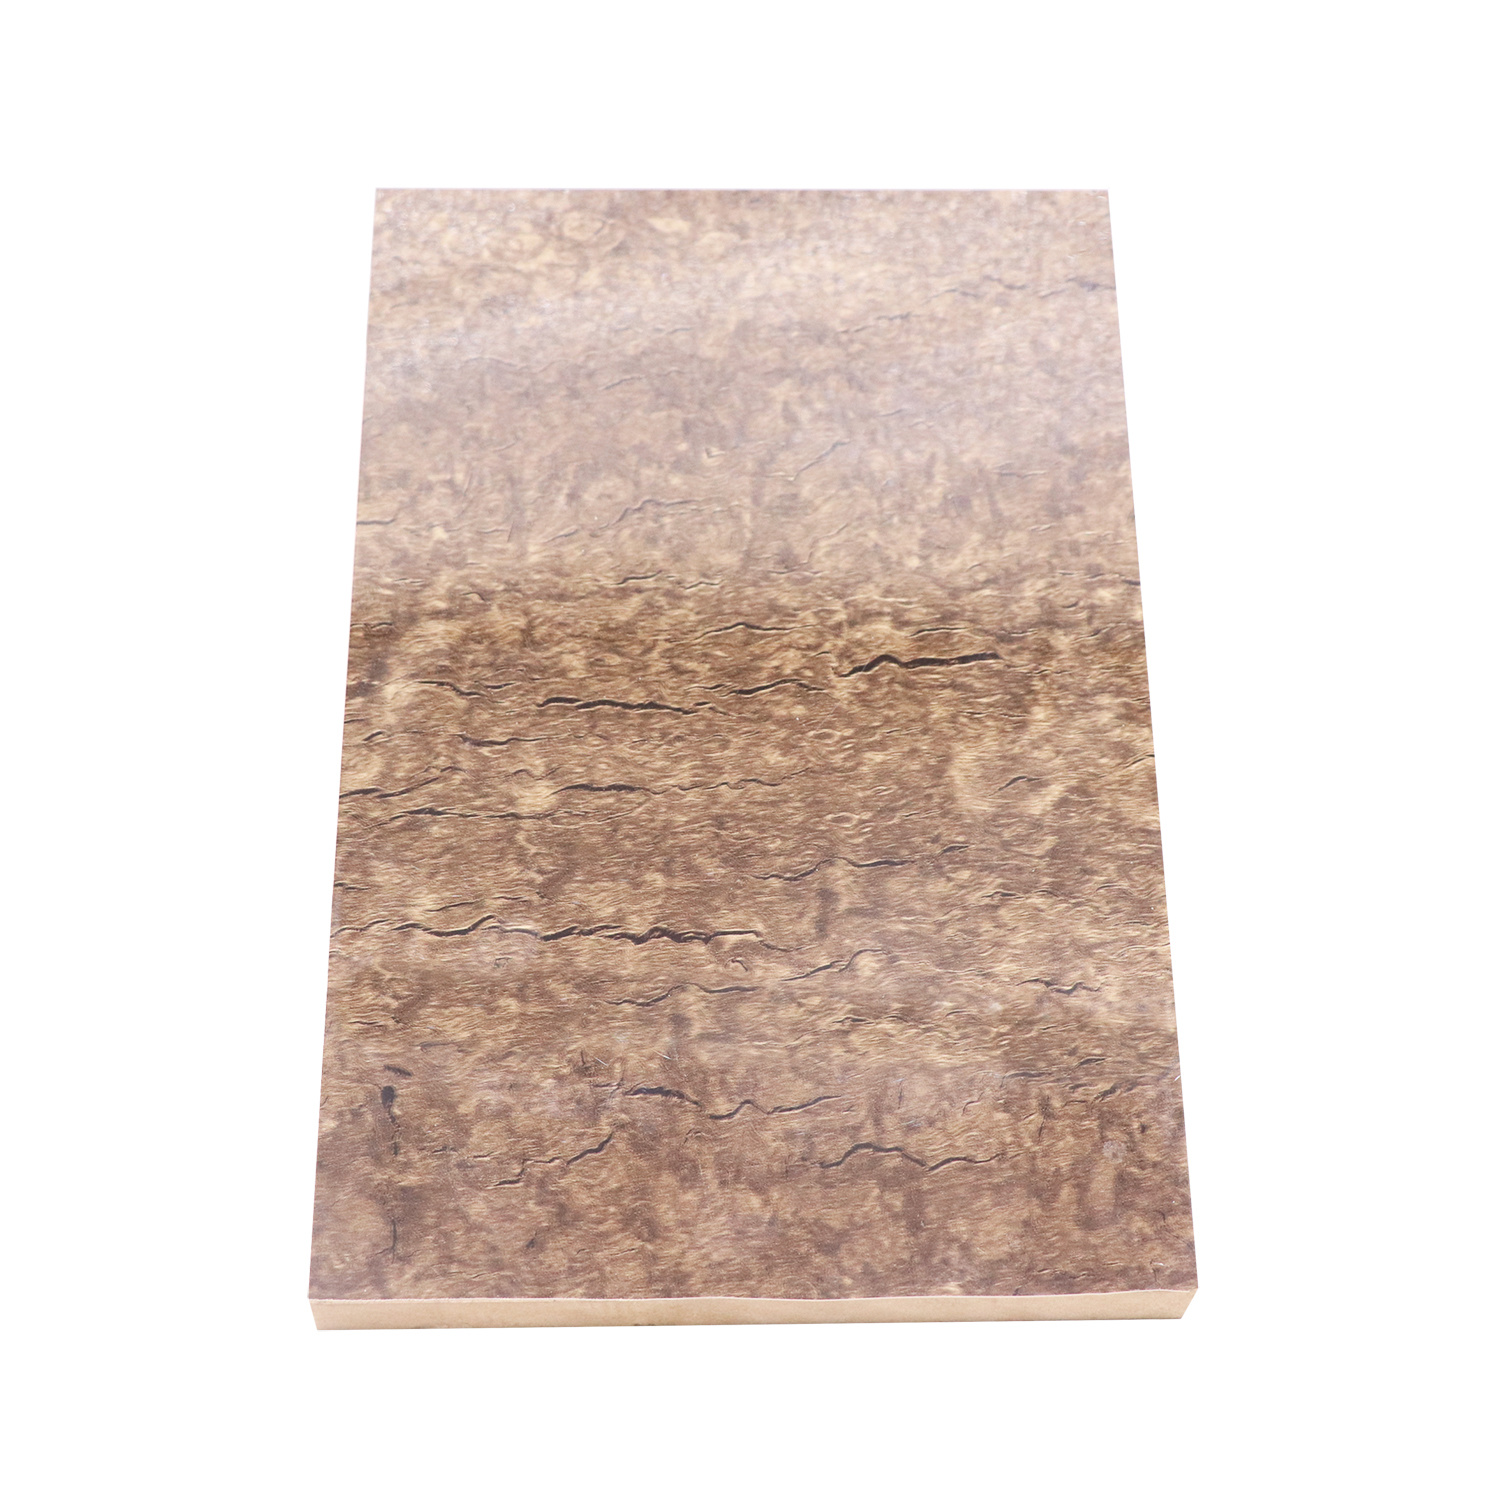 Melamine Stone-Grain Faced MDF Board Brown Faced Smooth MDF Board for Wall Panel